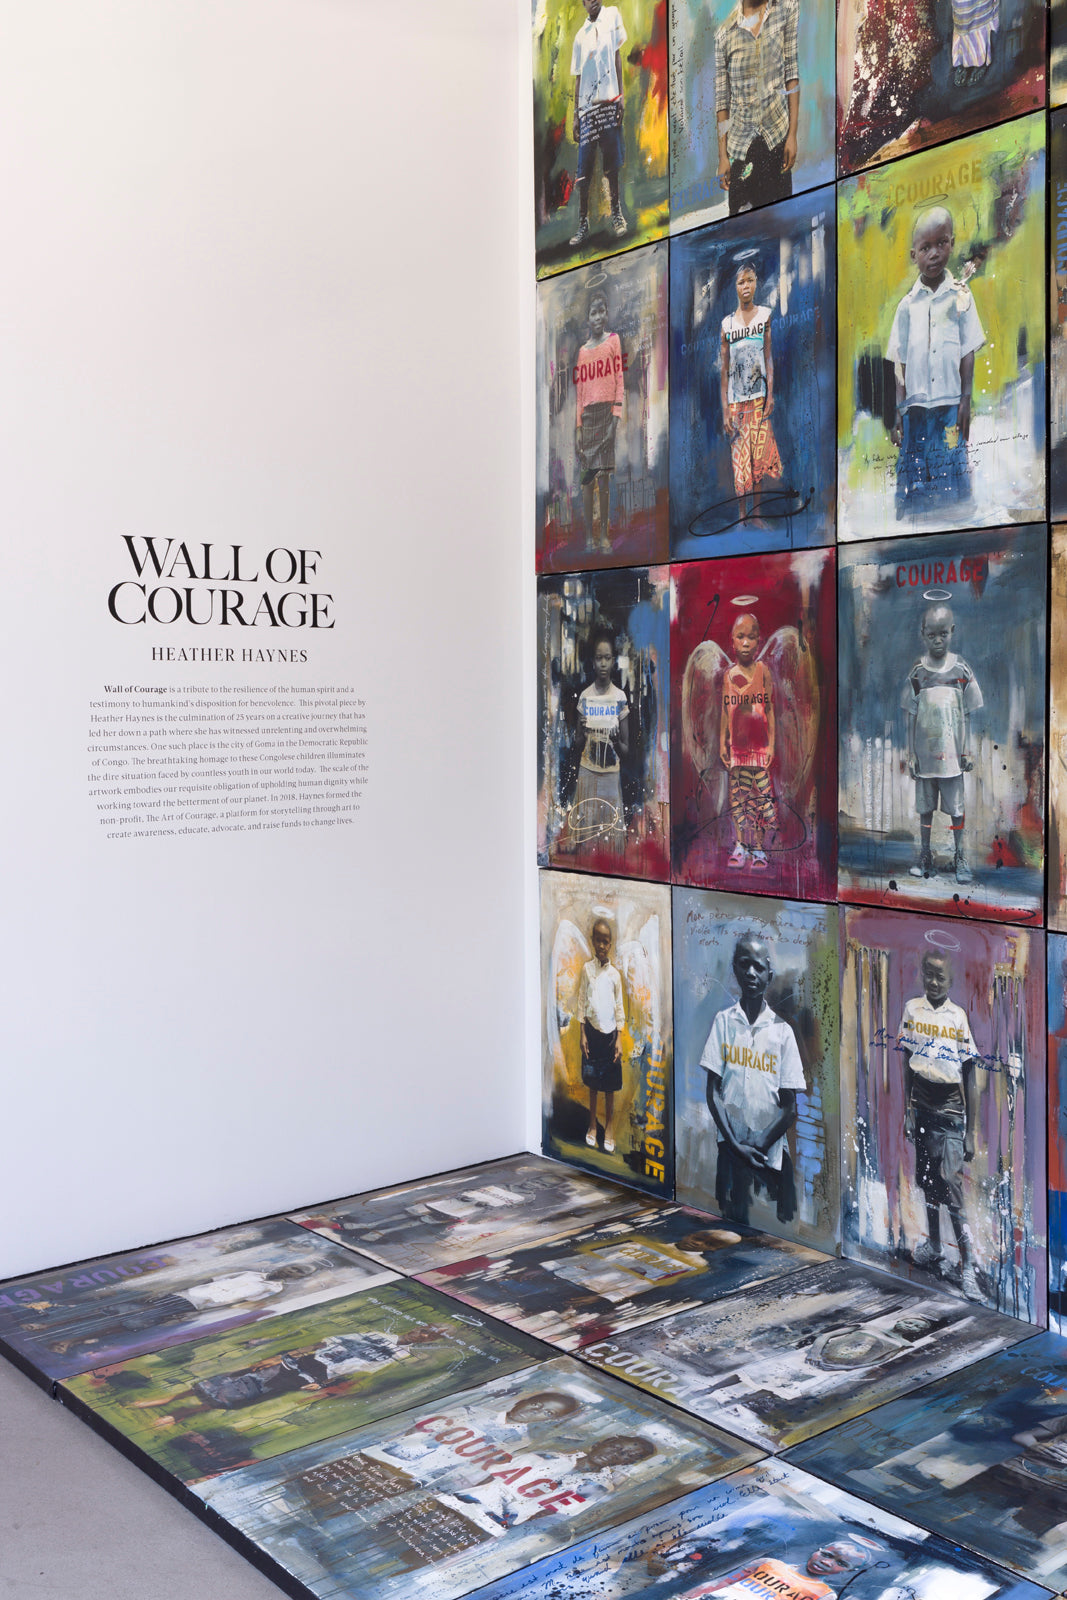 Wall of Courage: Stephane